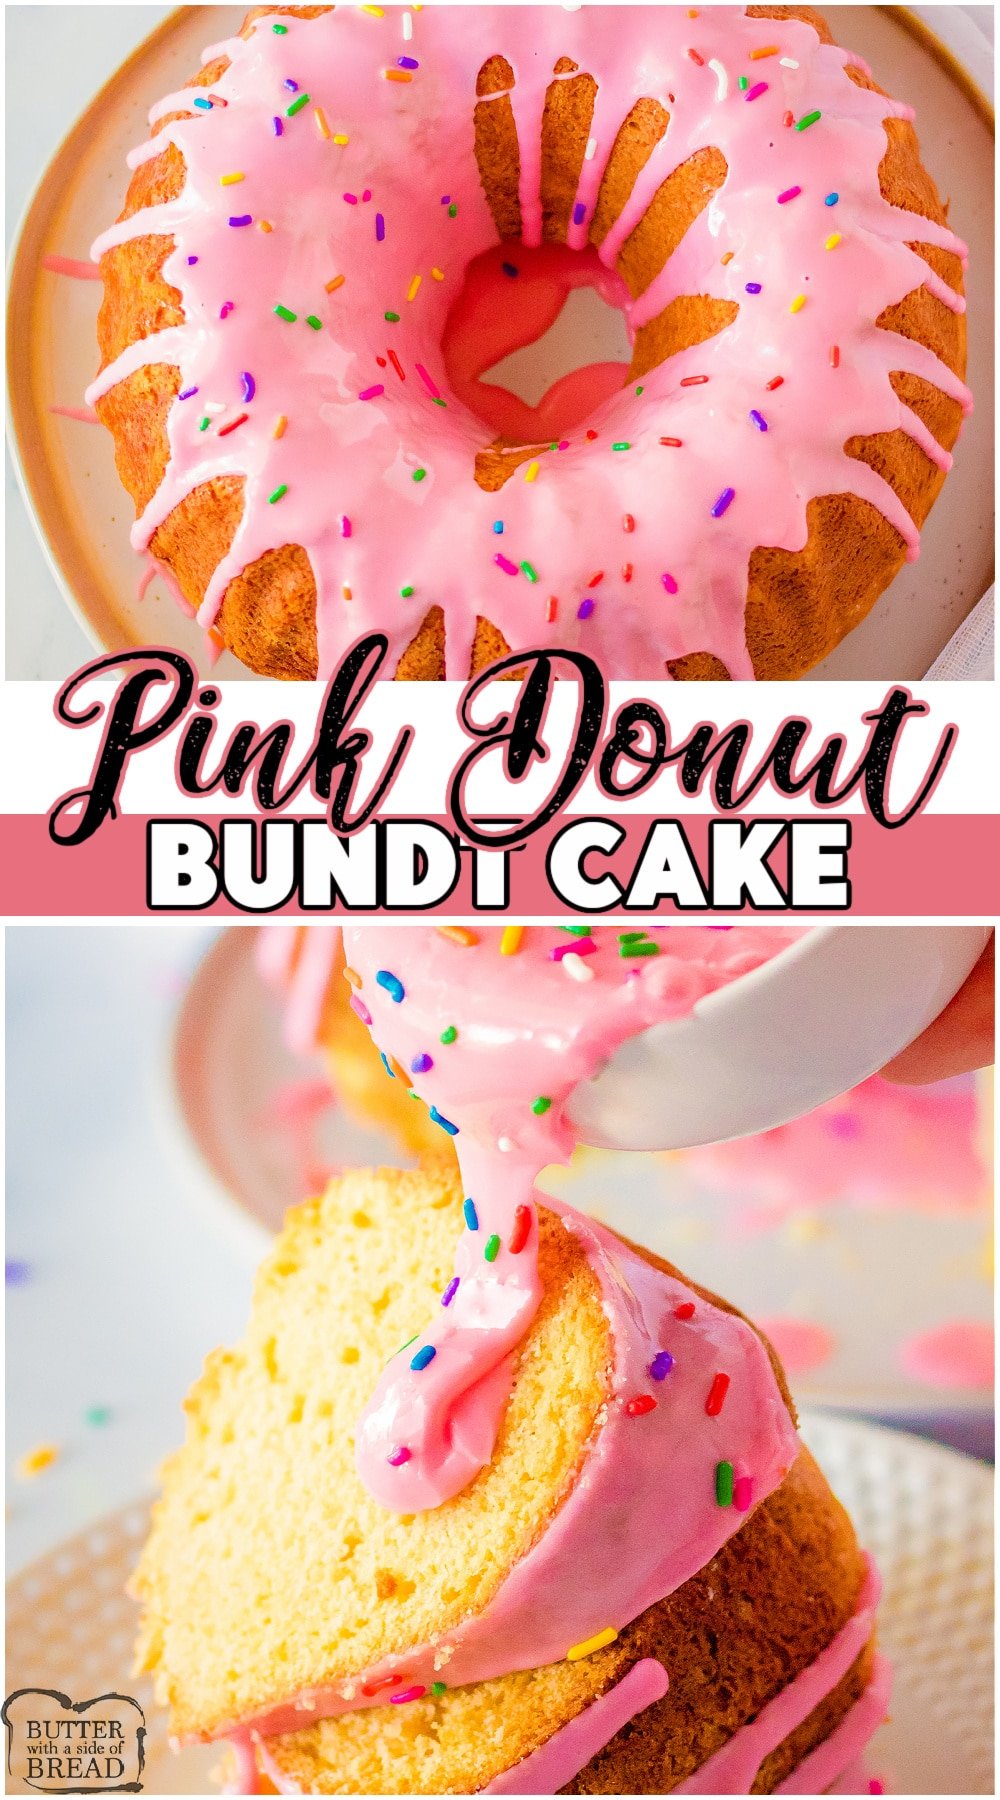 Pink Donut Bundt Cake with sprinkles looks like a frosted donut! Simple vanilla bundt cake recipe with a lovely pink icing that helps give the cake that awesome donut look. #cake #donut #bundtcake #baking #dessert #pink #easyrecipe from BUTTER WITH A SIDE OF BREAD